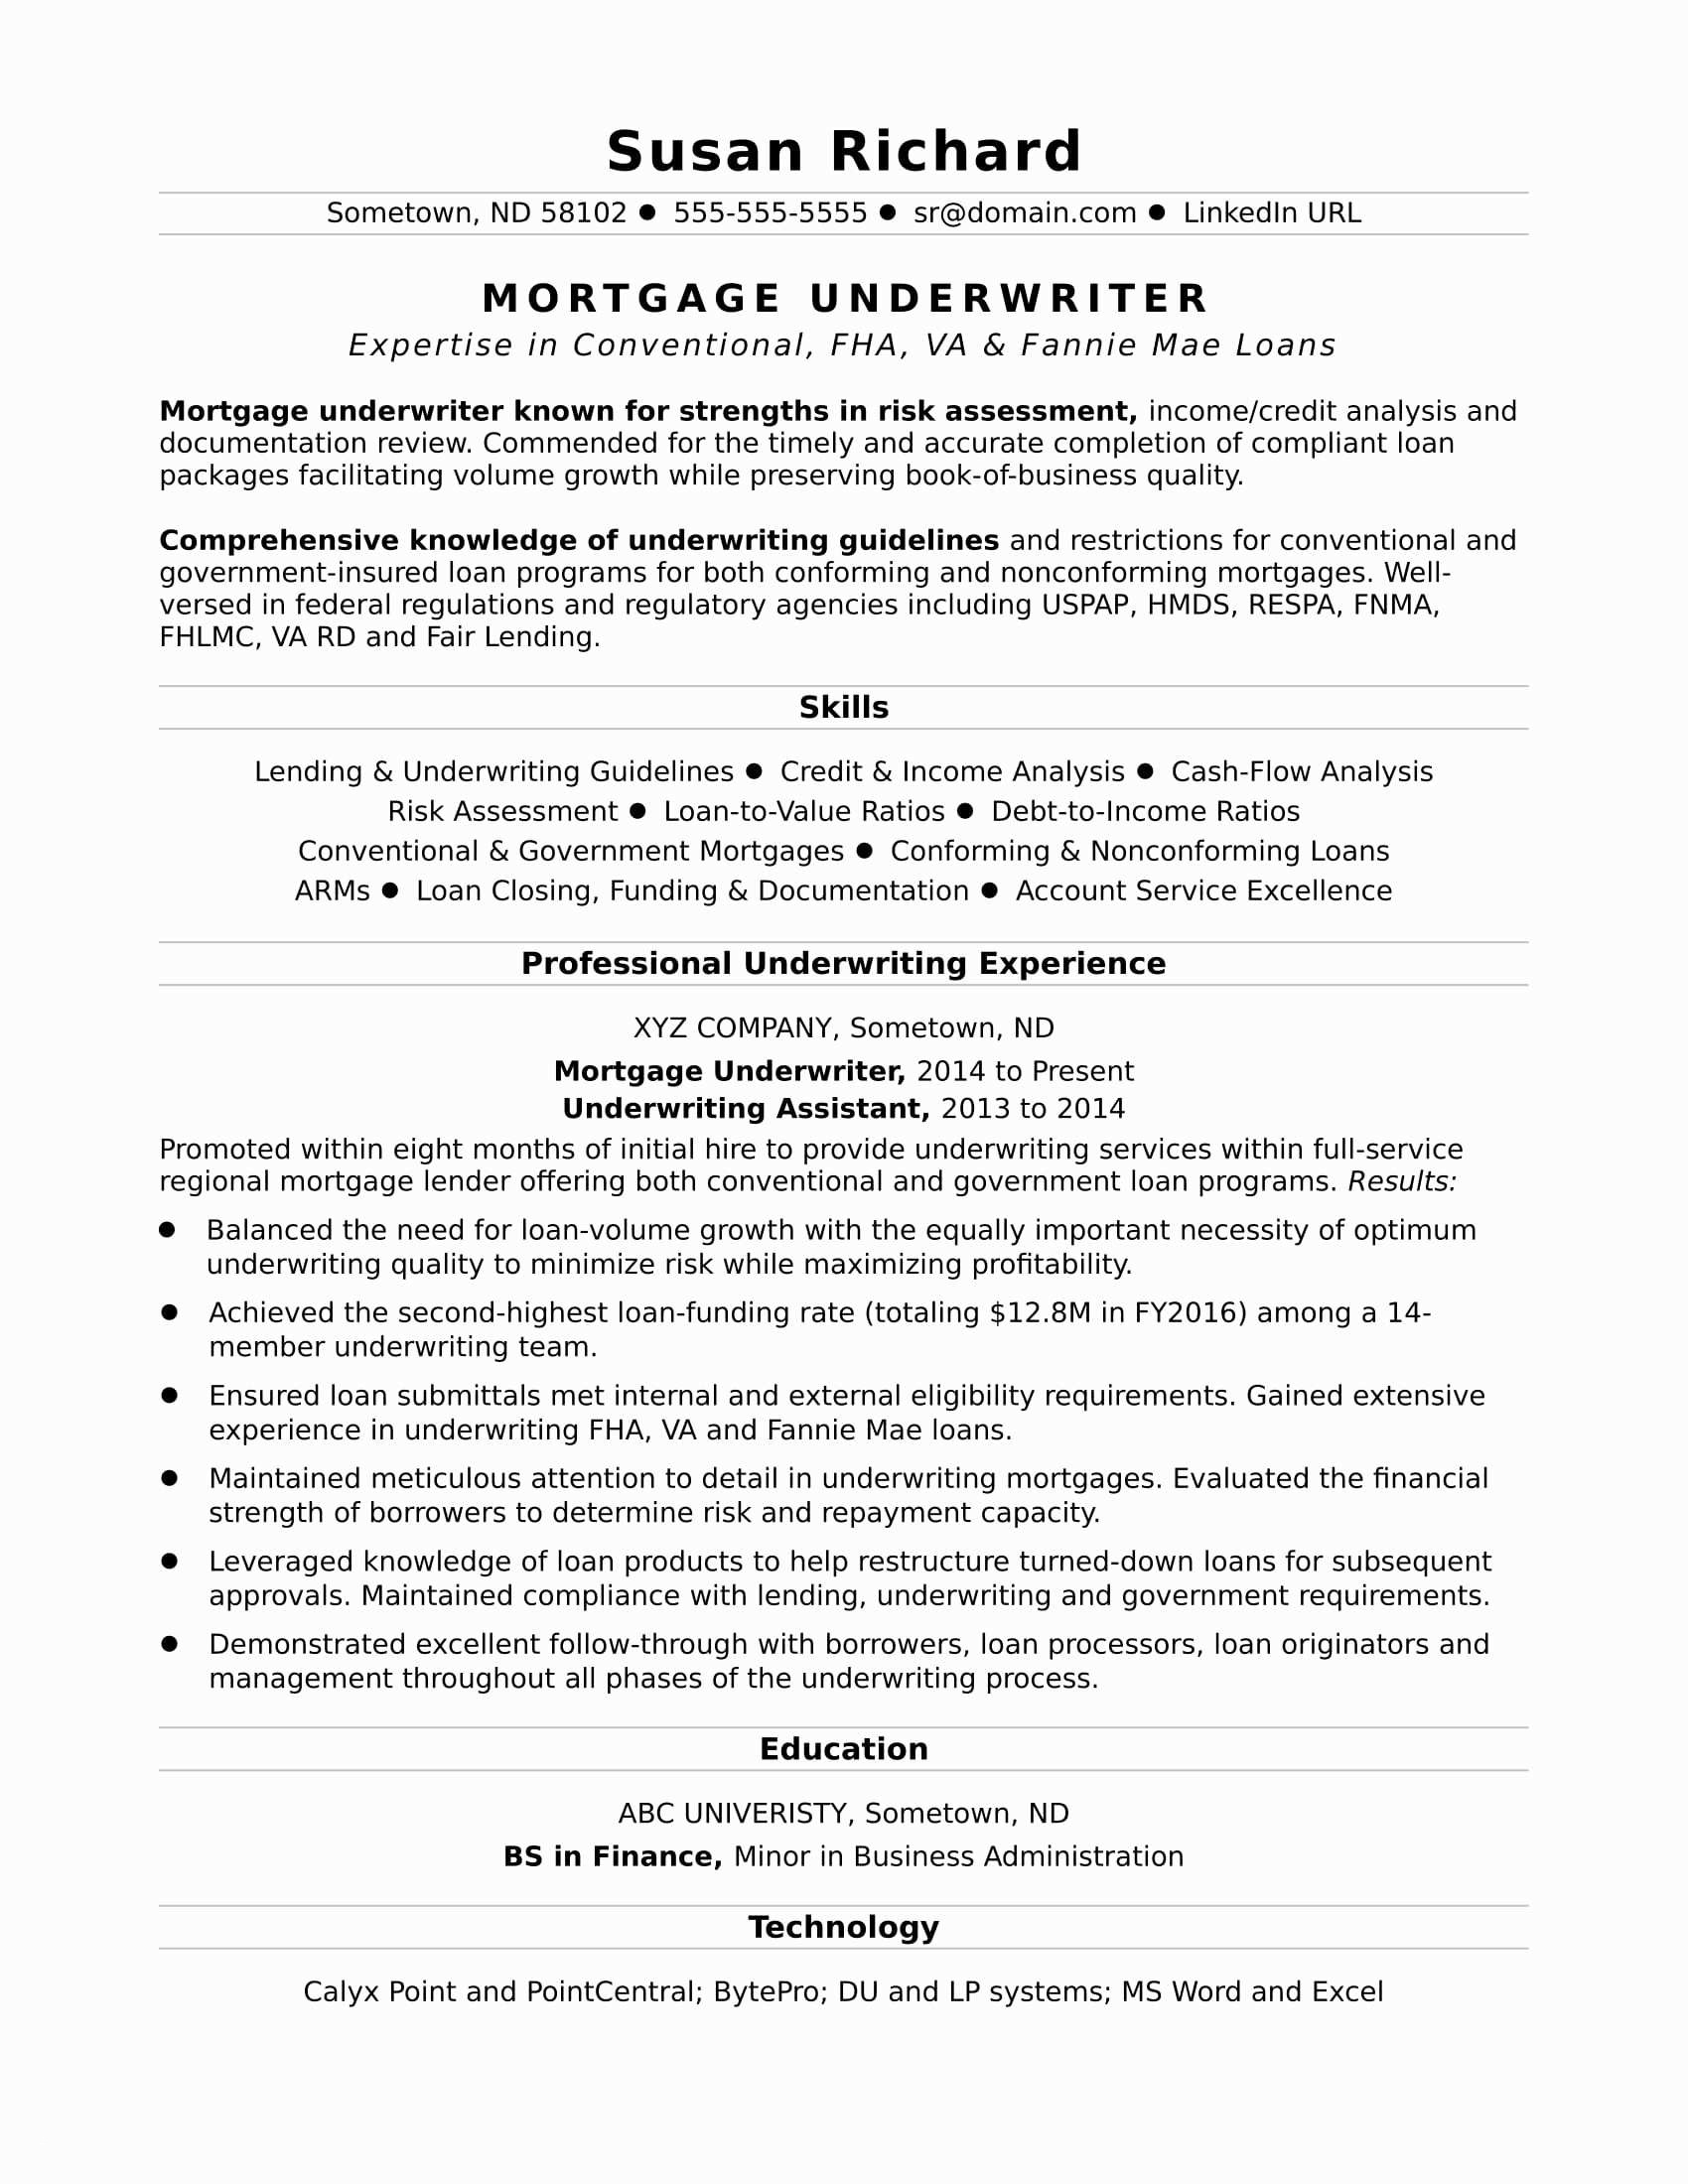 Microsoft Cover Letter Template - Teaching Resume Cover Letter New Sample Cover Letter Template Lovely